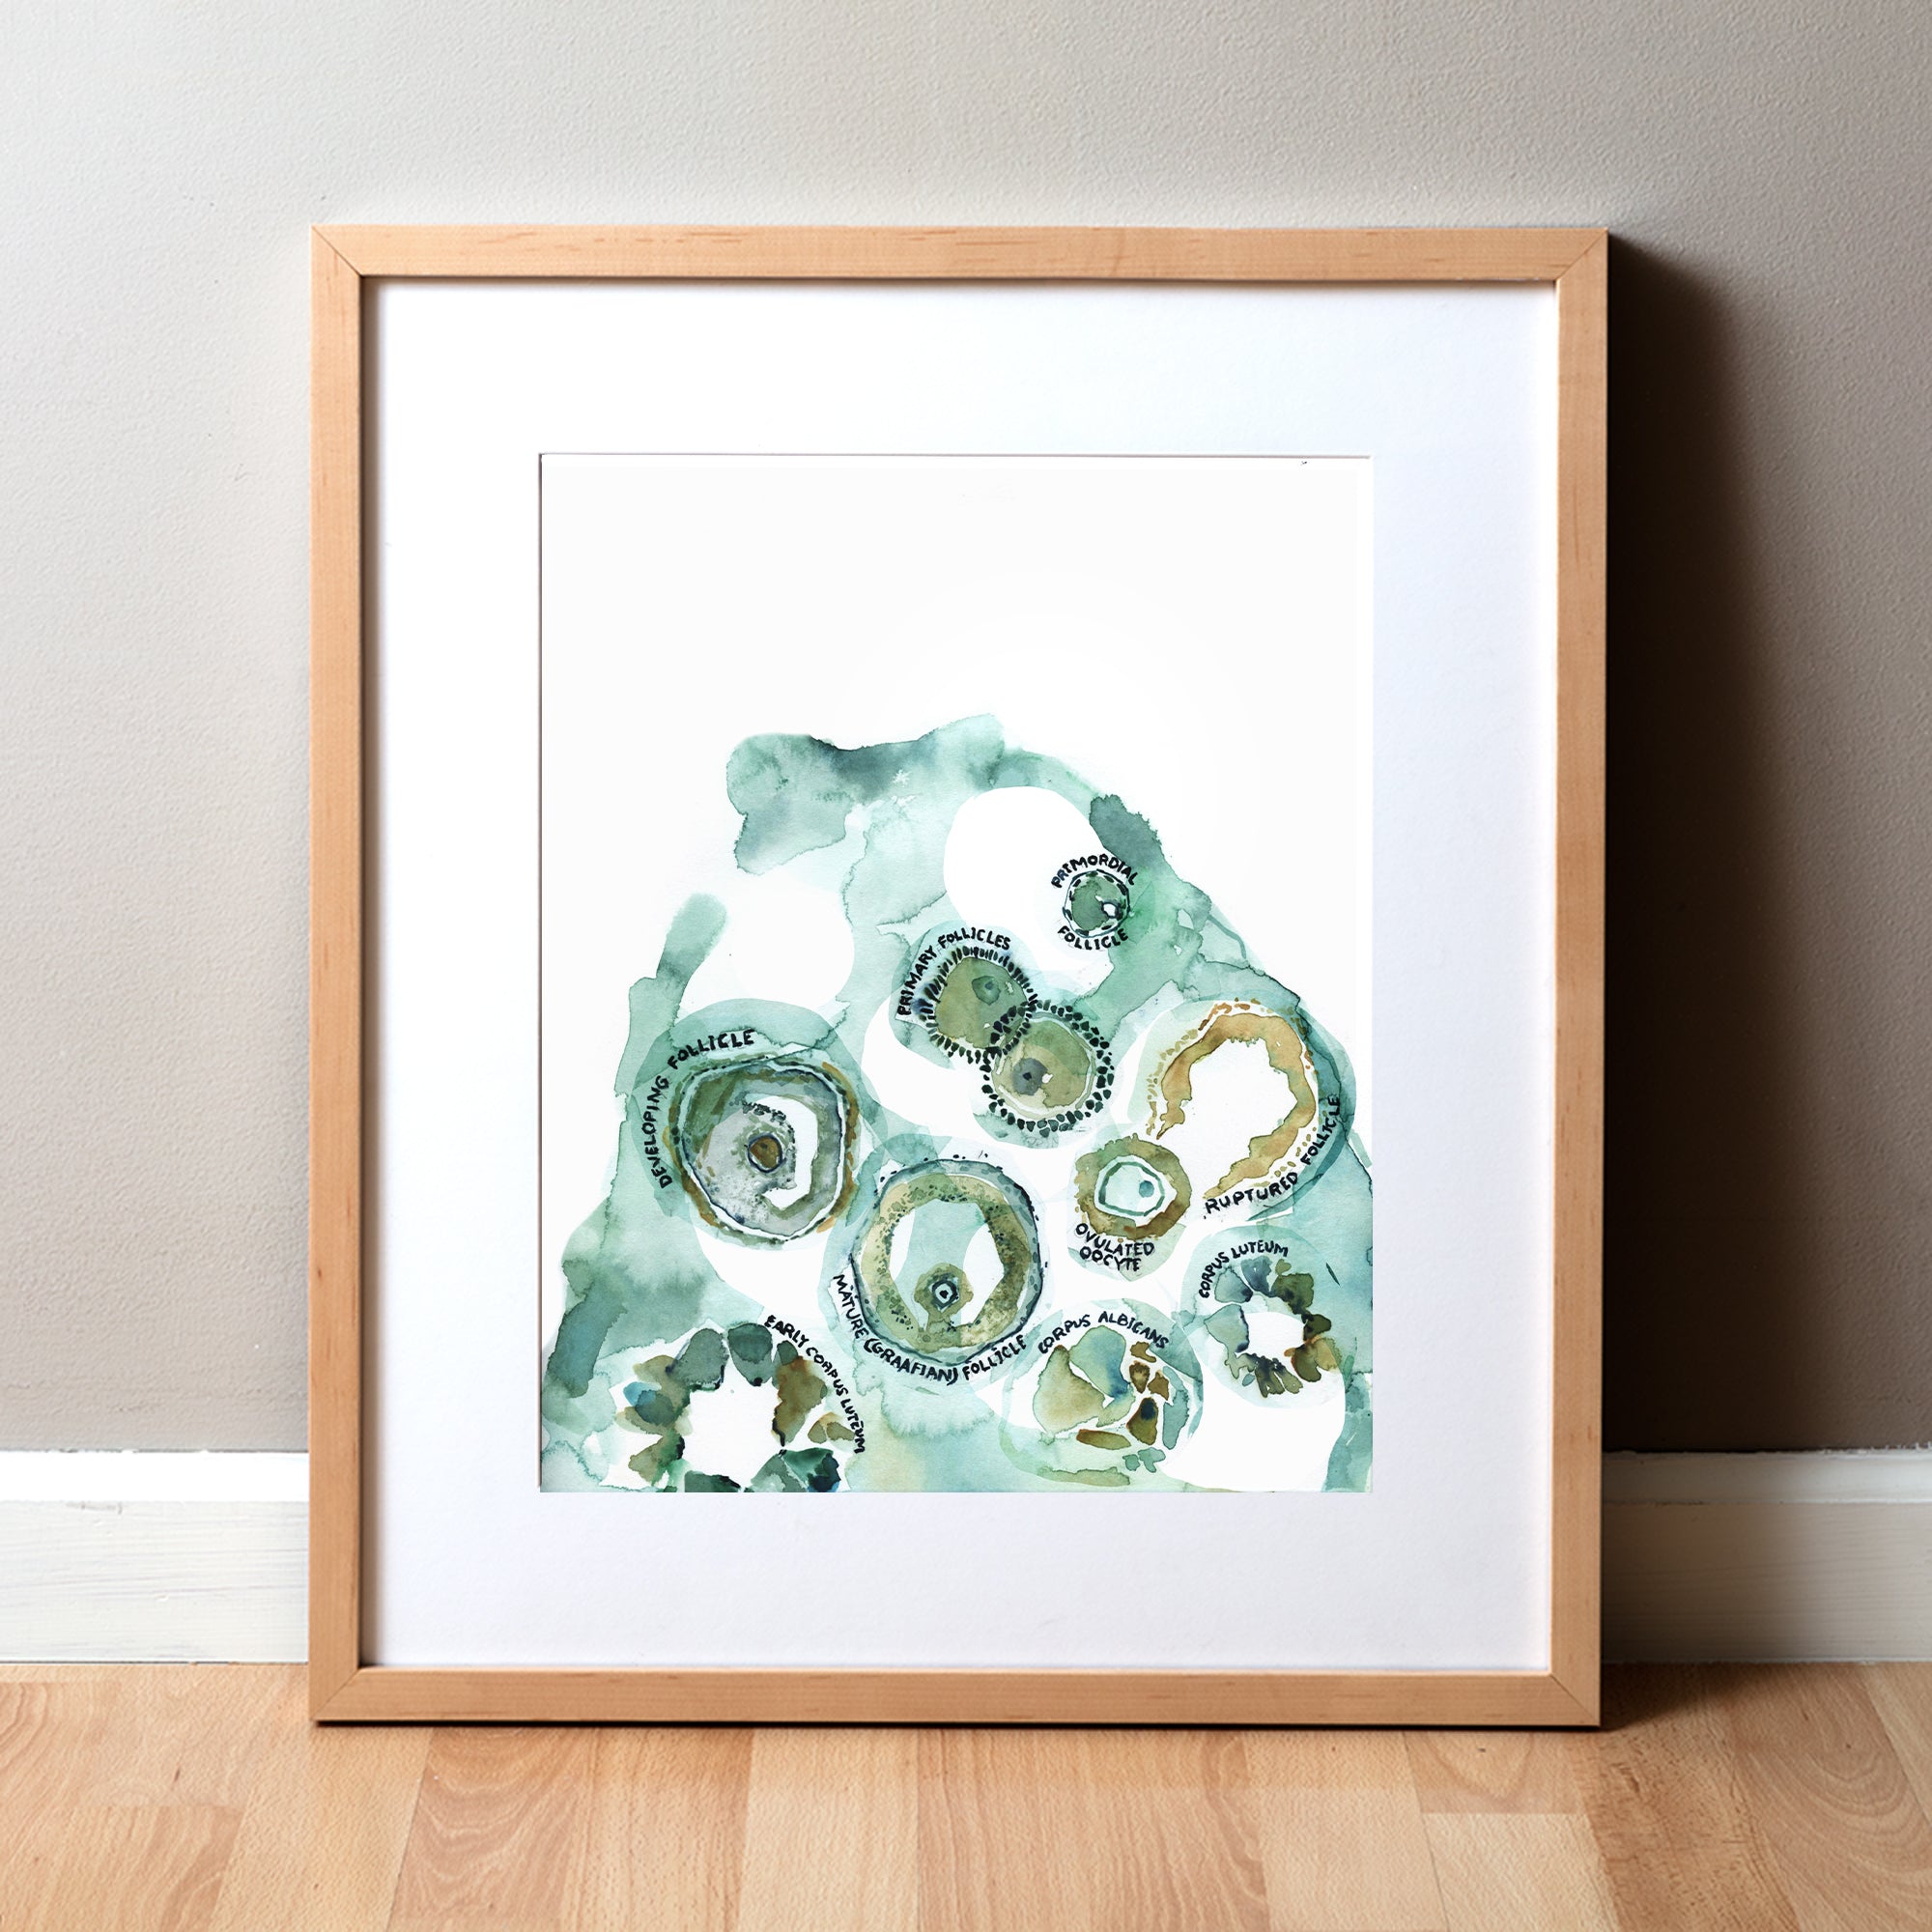 Framed watercolor painting of an ovulation cycle